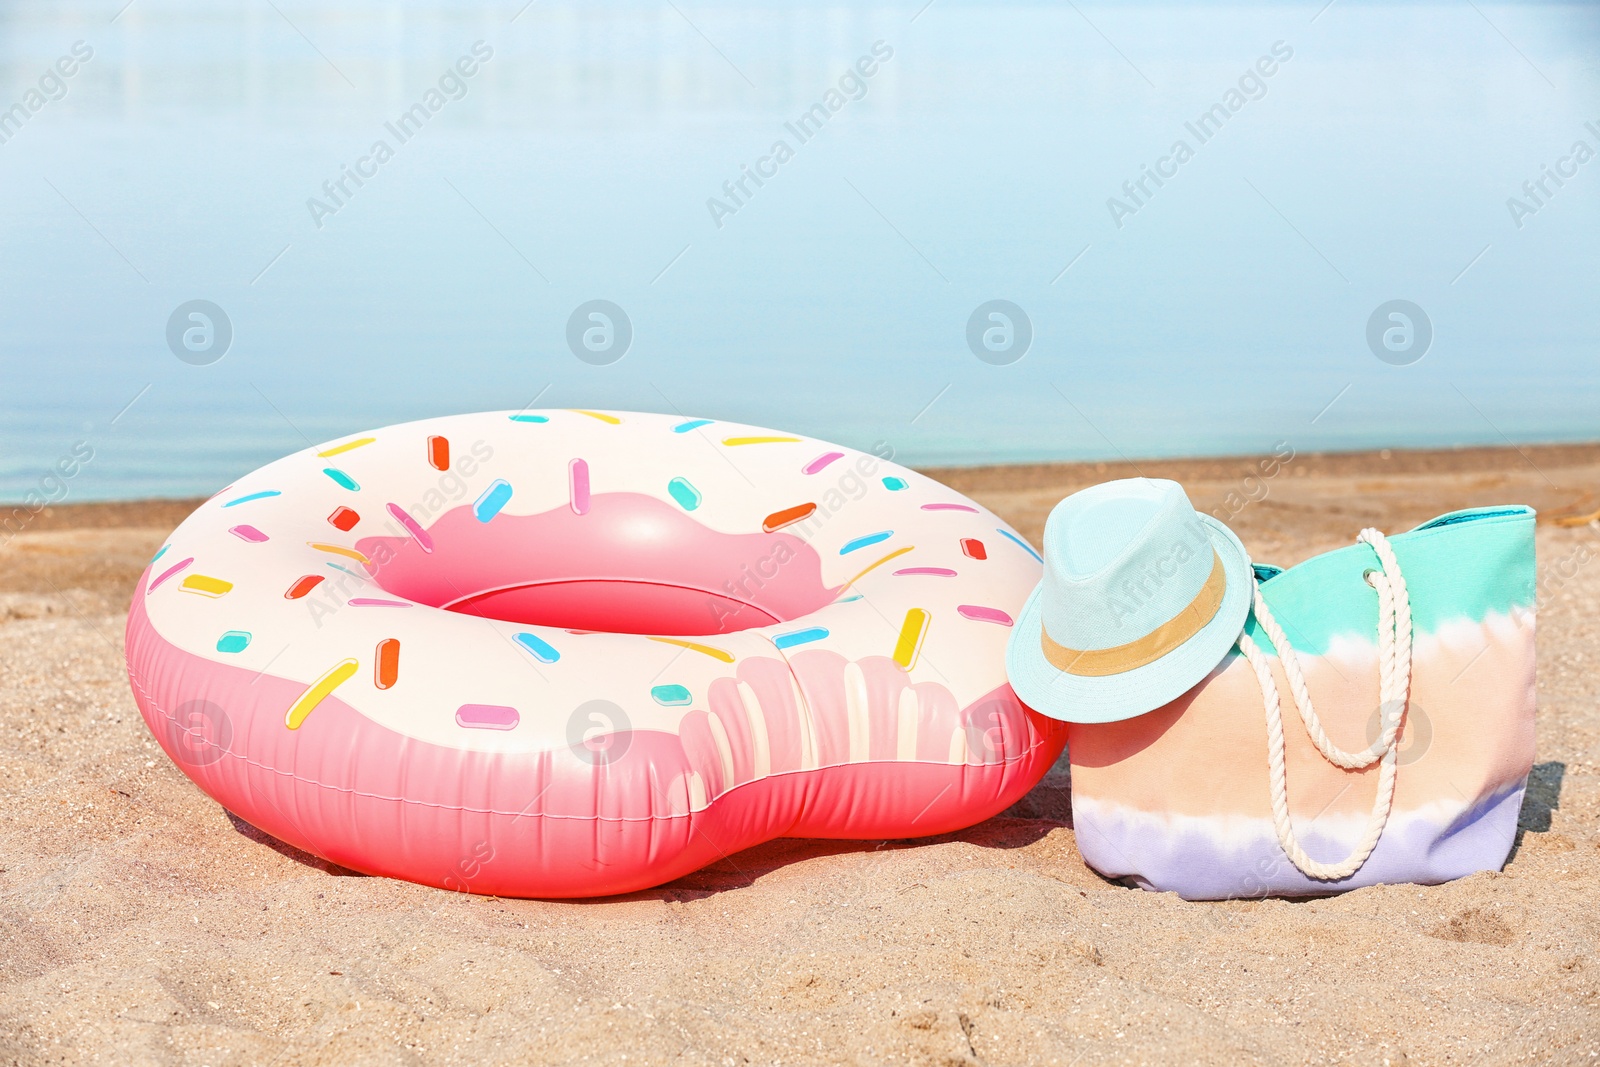 Photo of Colorful inflatable ring, hat and bag on sand. Beach object